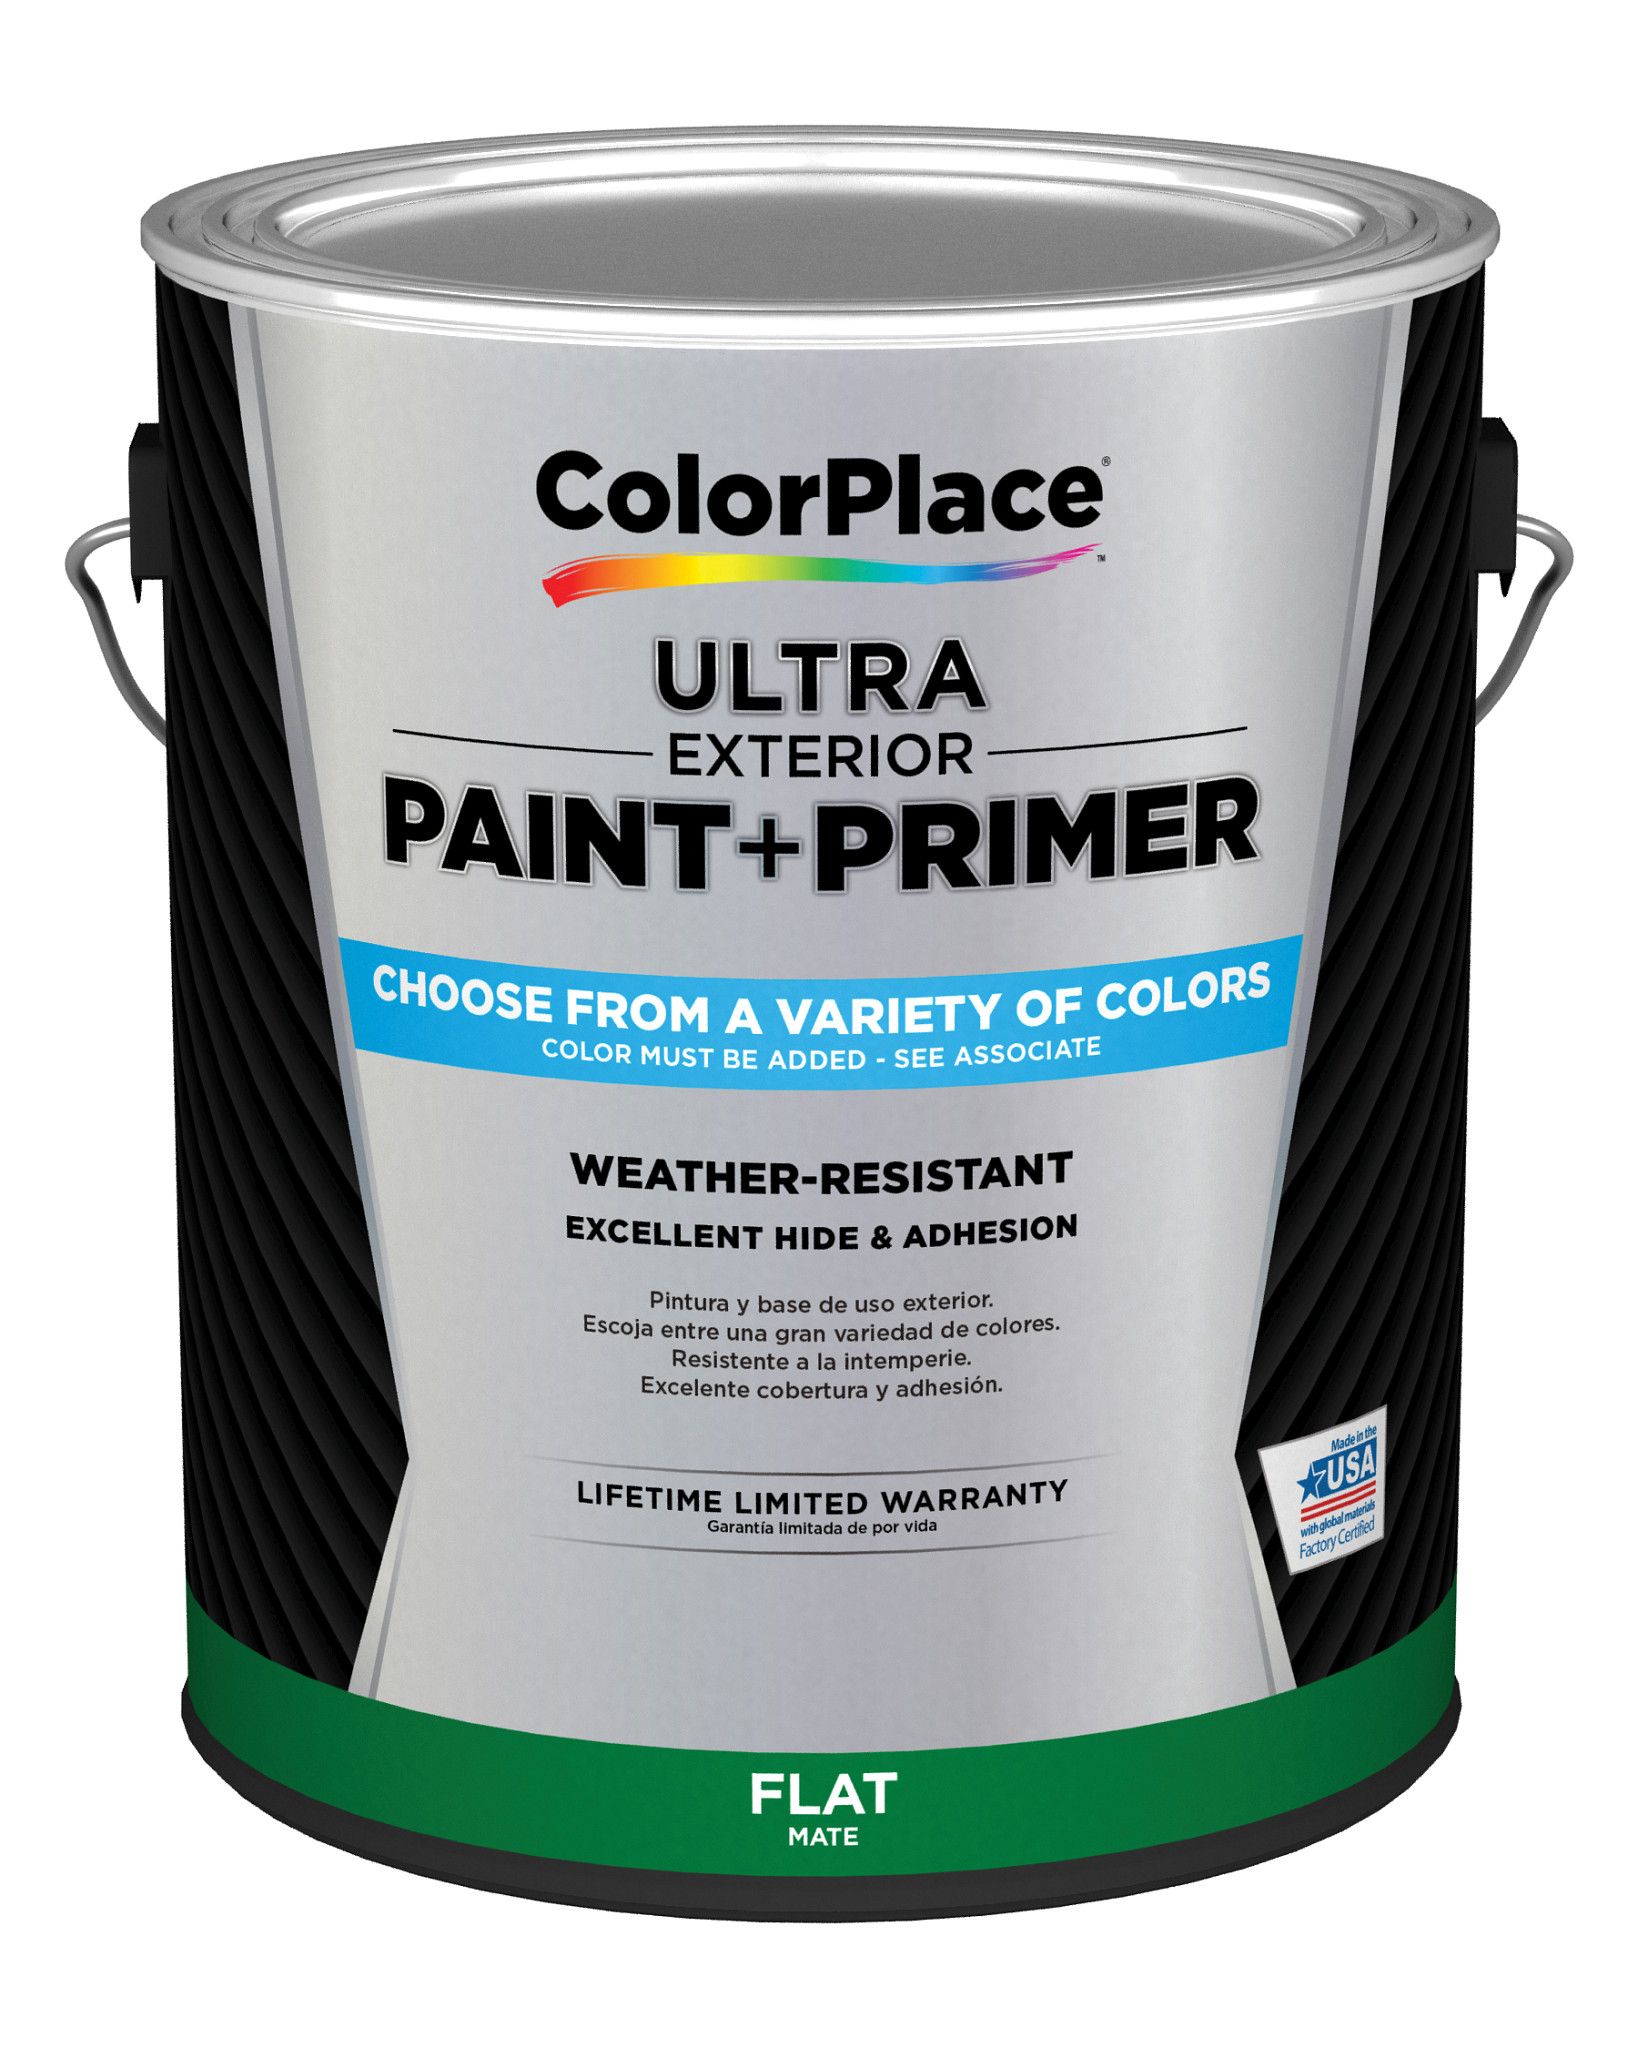 ColorPlace Ultra Exterior Paint & Primer, Blue Ice Age, Flat, 1 Gallon - image 4 of 11